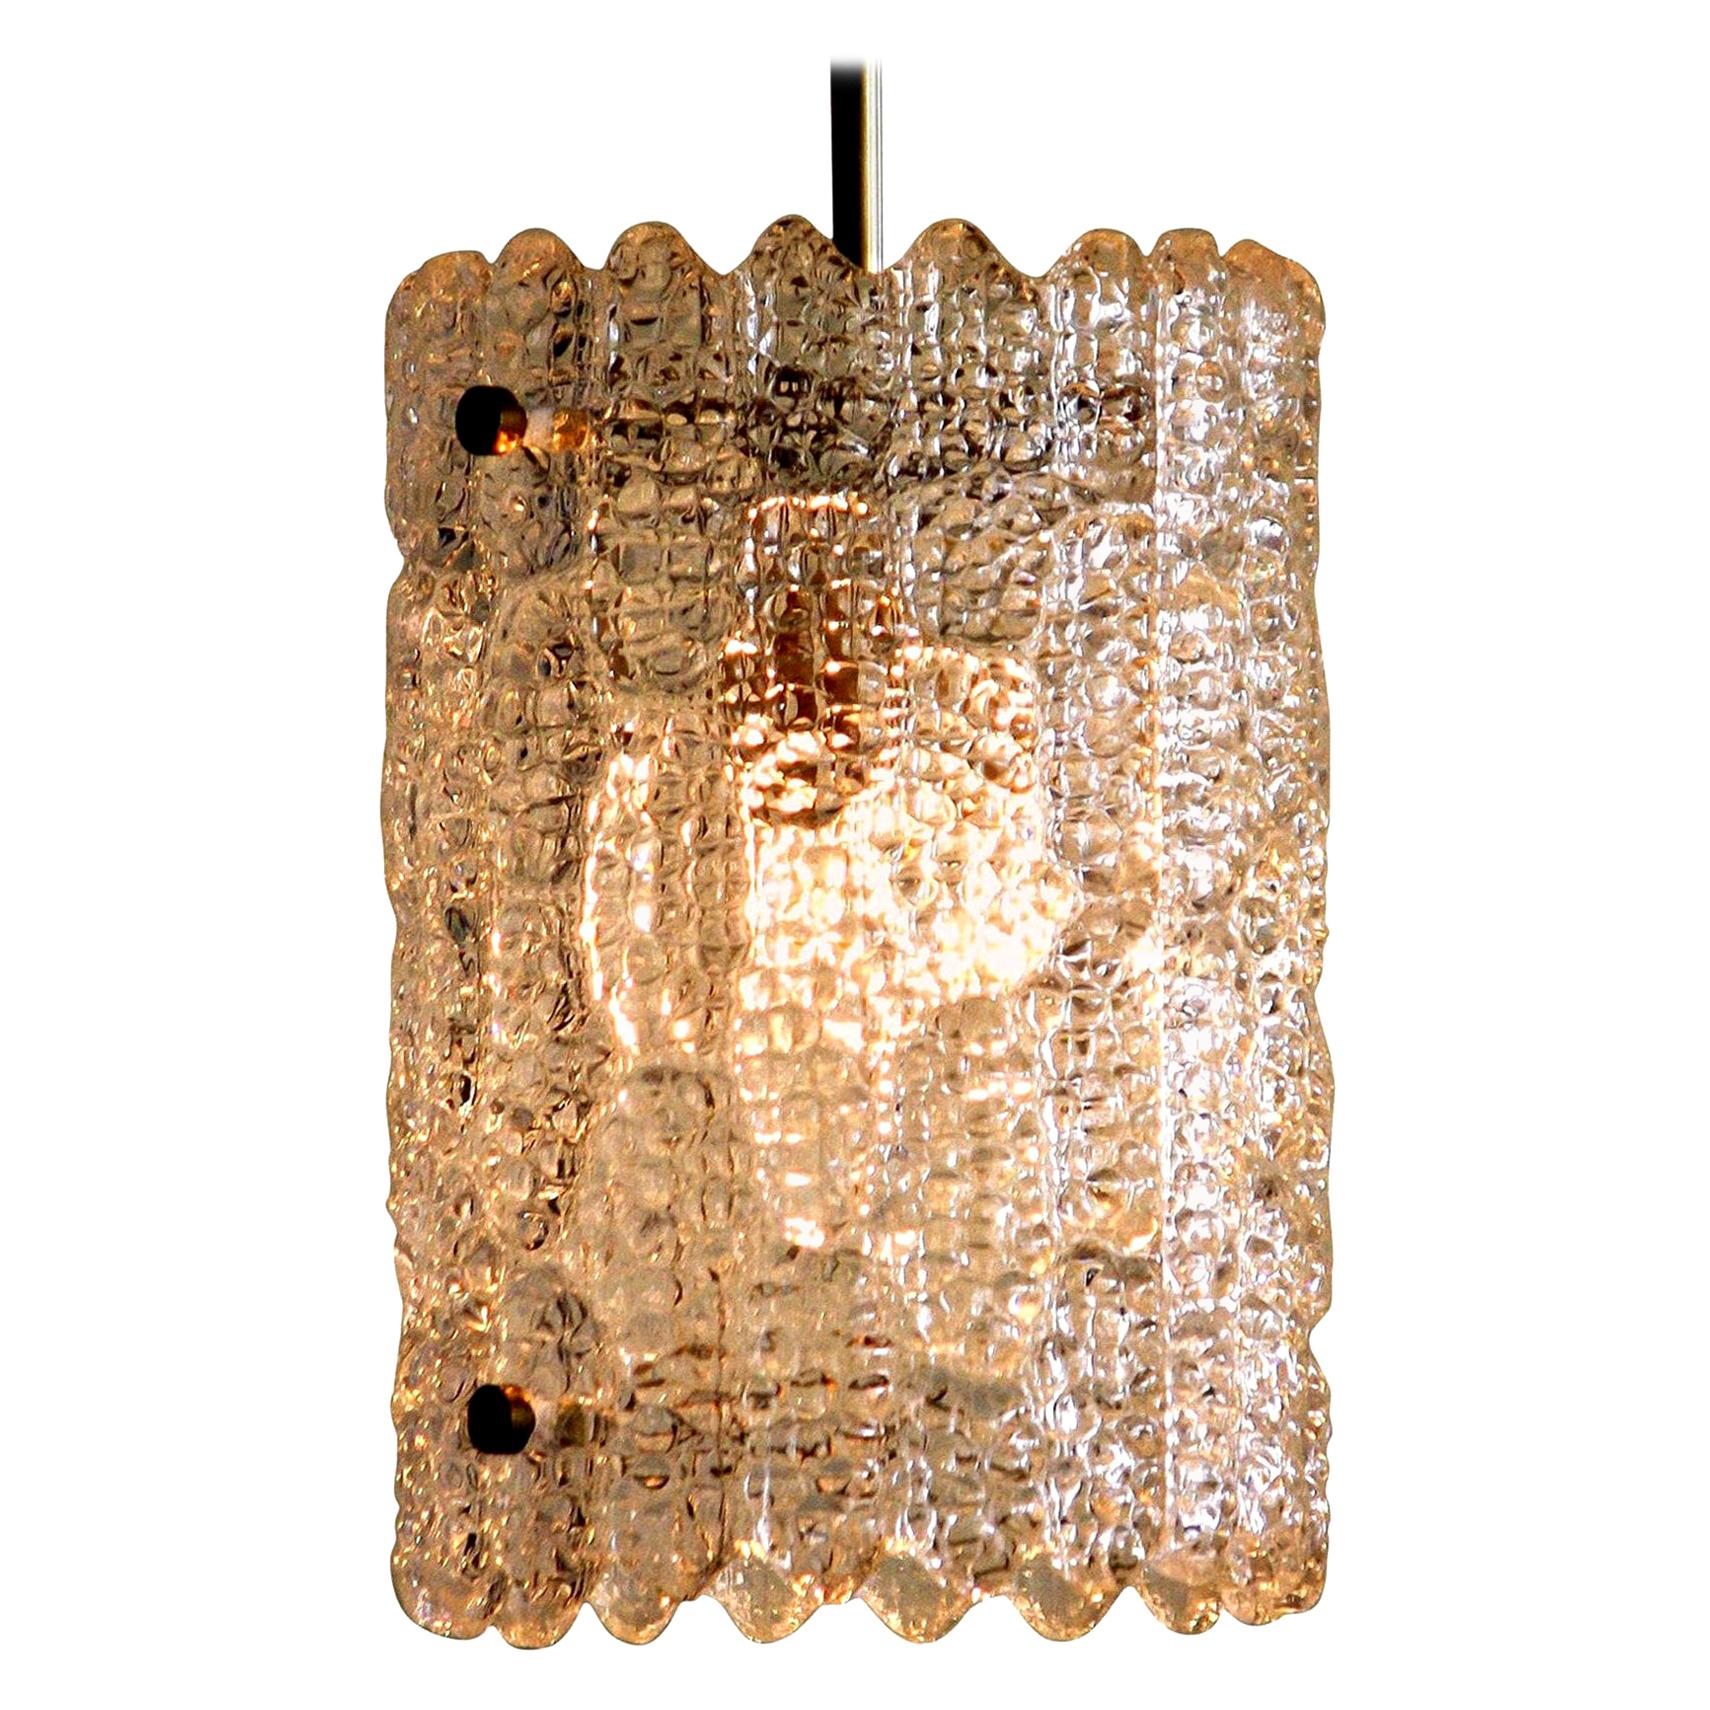 Beautiful pendant designed by Carl Fagerlund for Orrefors, Sweden.
This lamp is made of brass with crystal glass and is in a very nice condition.
The textured glass reflects a wonderful light.
Period: 1960s.
Dimensions: H 25 cm, Ø 18 cm.